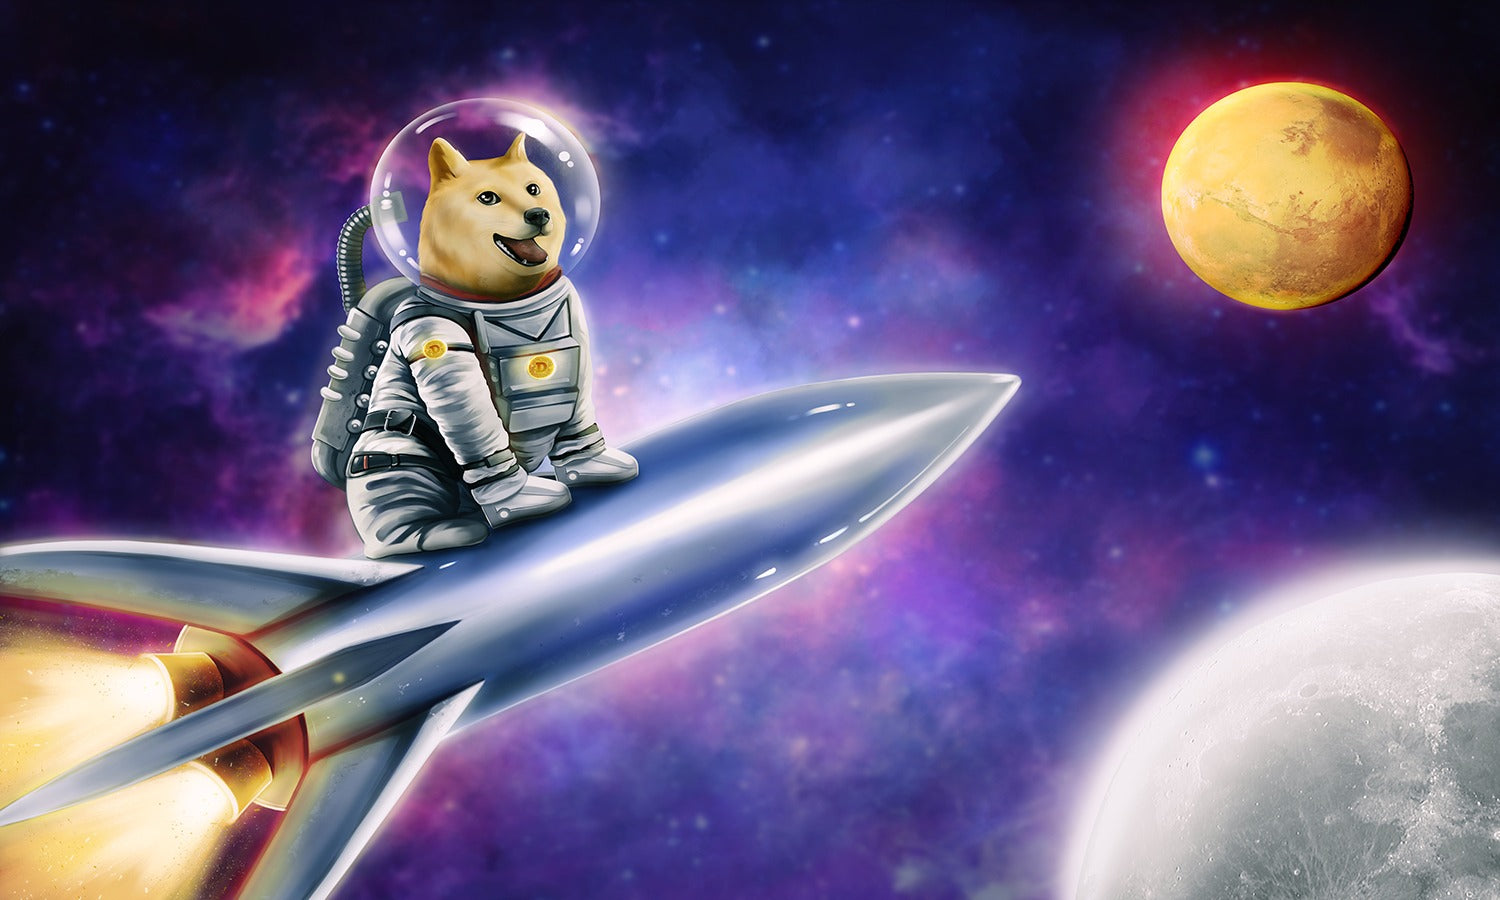 Dogecoin to Mars - NEW RELEASE (Limited to 10)